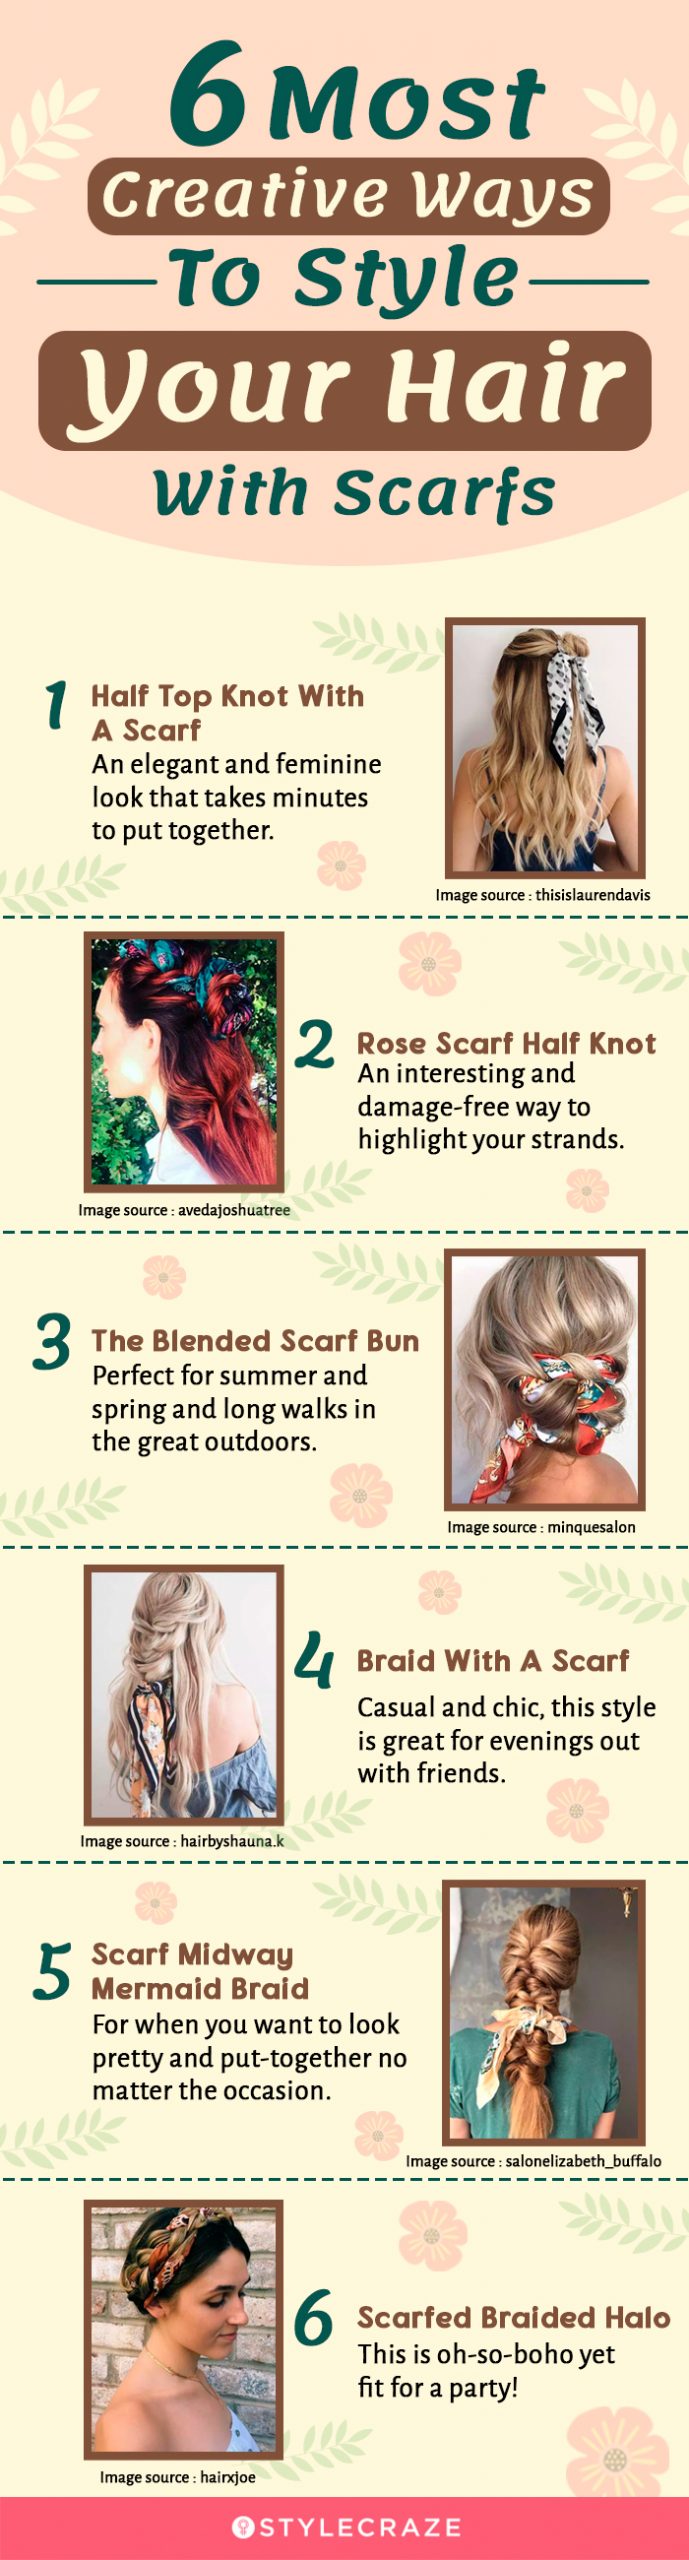 6 most creative ways to style your hair with scarfs (infographic)